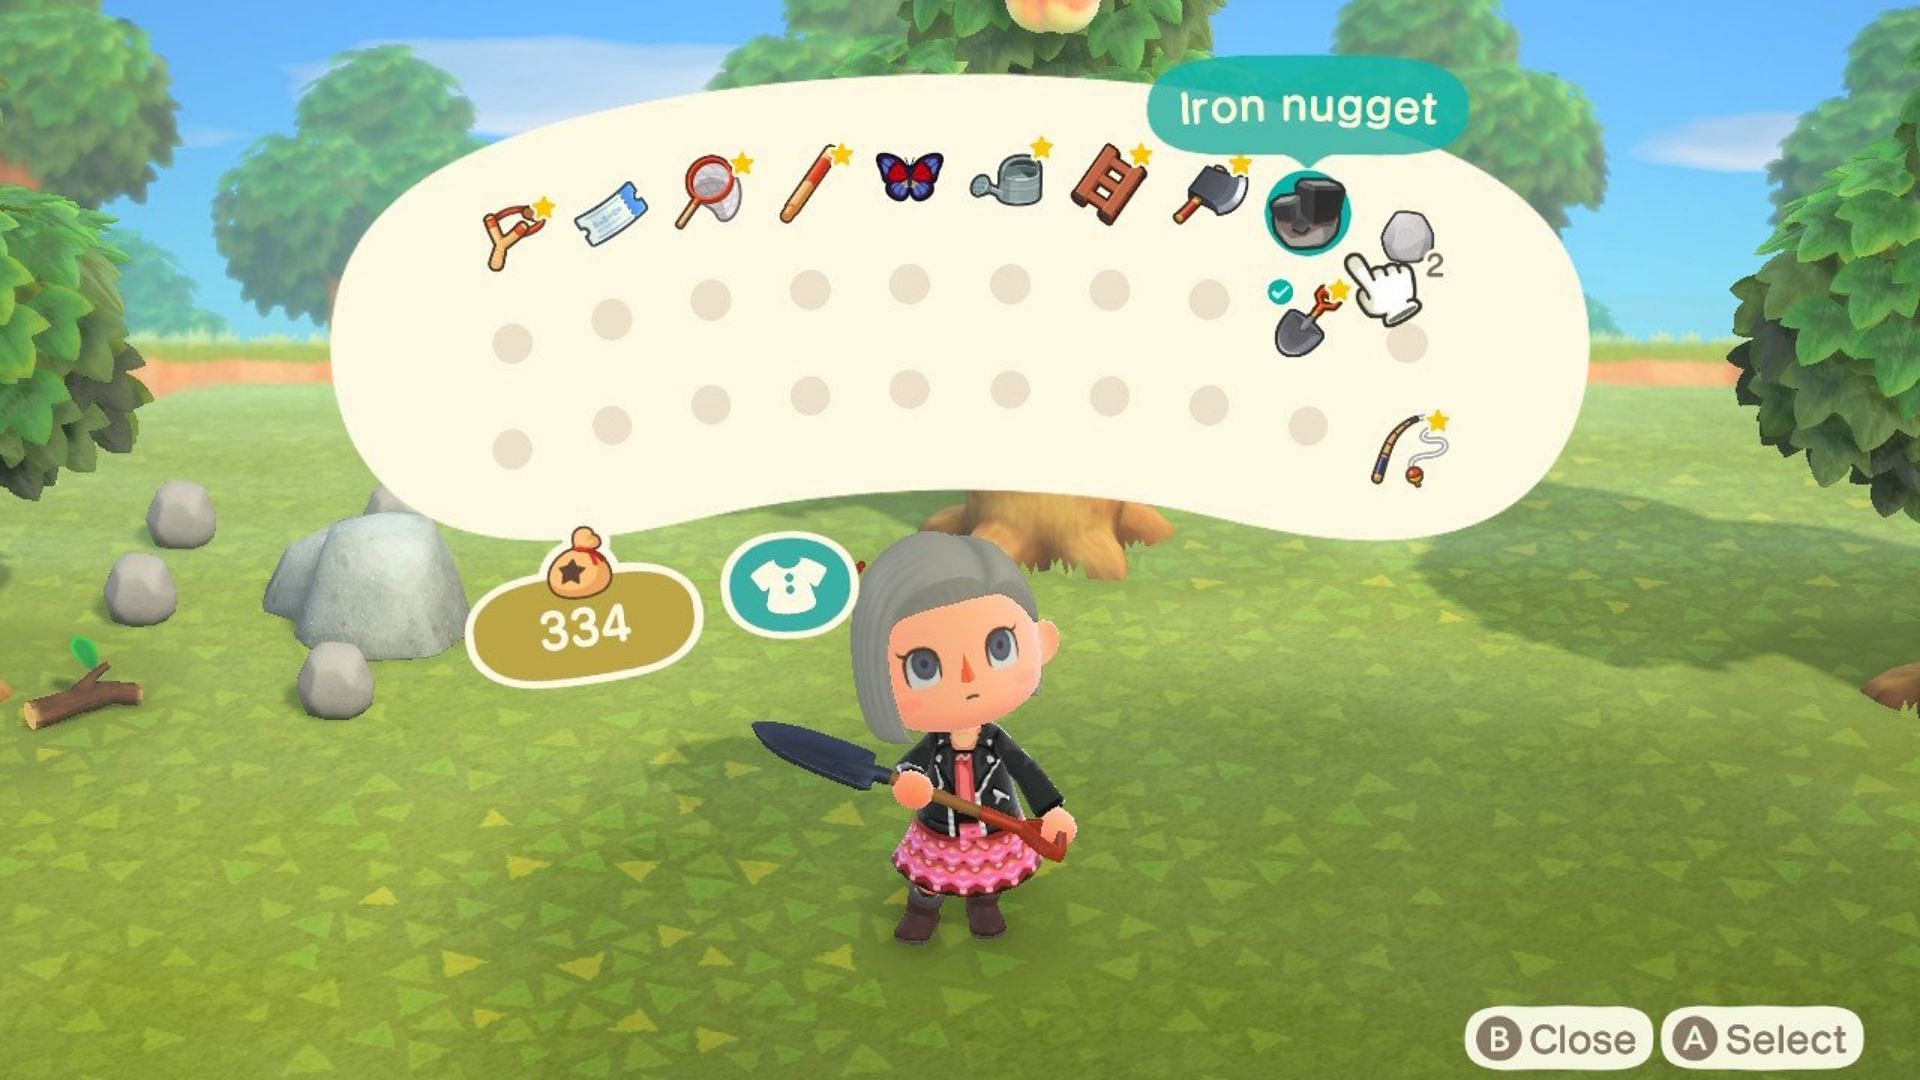 How to get a lot of Iron nuggets in Animal Crossing: New Horizons